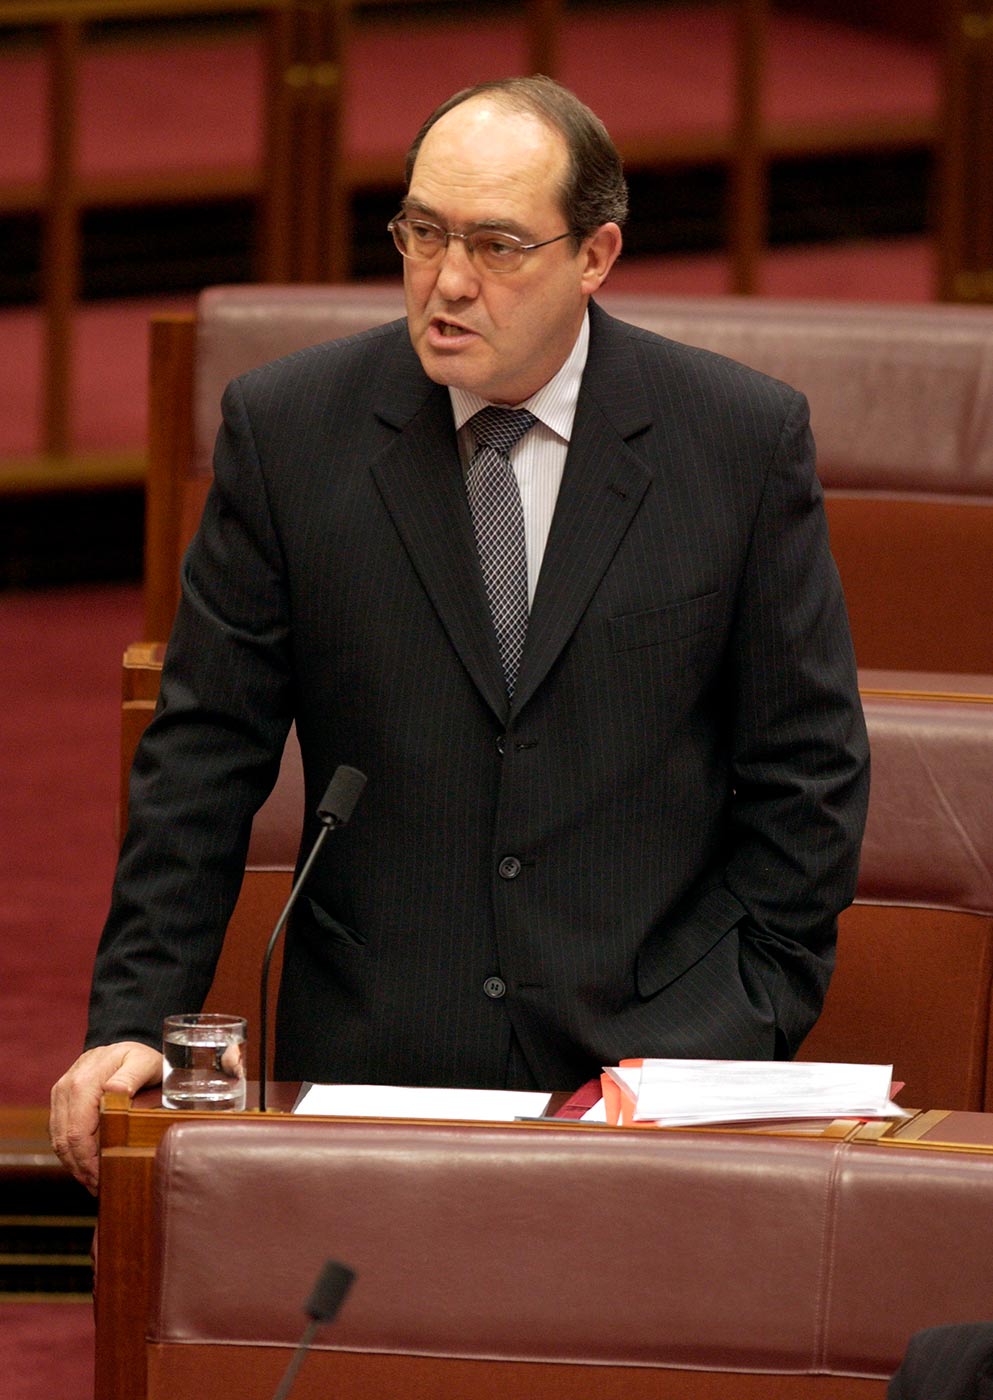 Colour photograph showing a man wearing a suit, leaning on a desk to address a parliamentary chamber. - click to view larger image